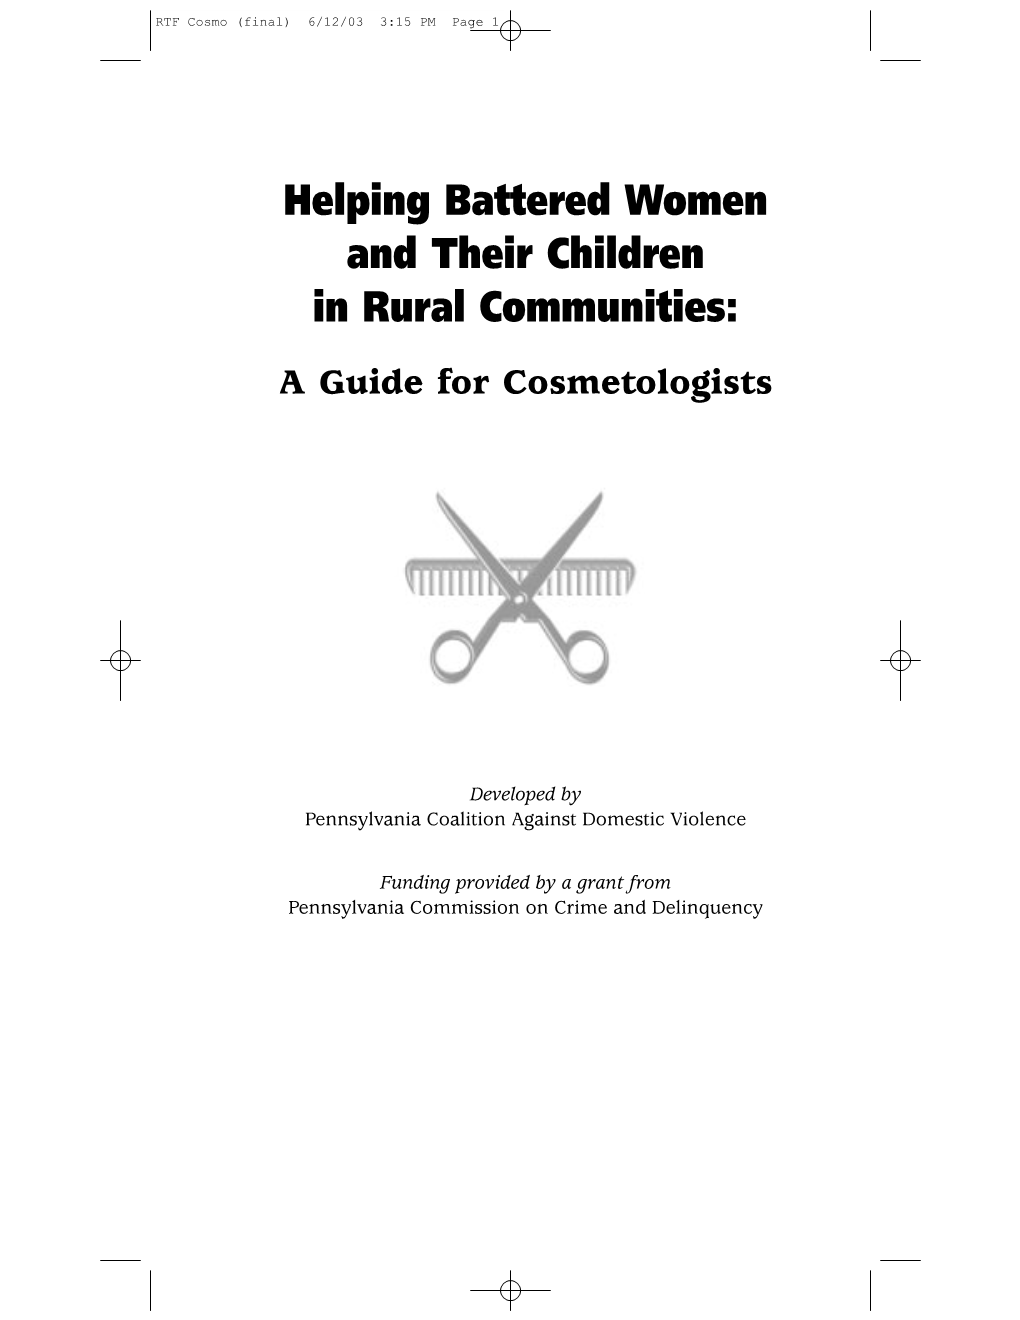 Helping Battered Women and Their Children in Rural Communities: a Guide for Cosmetologists